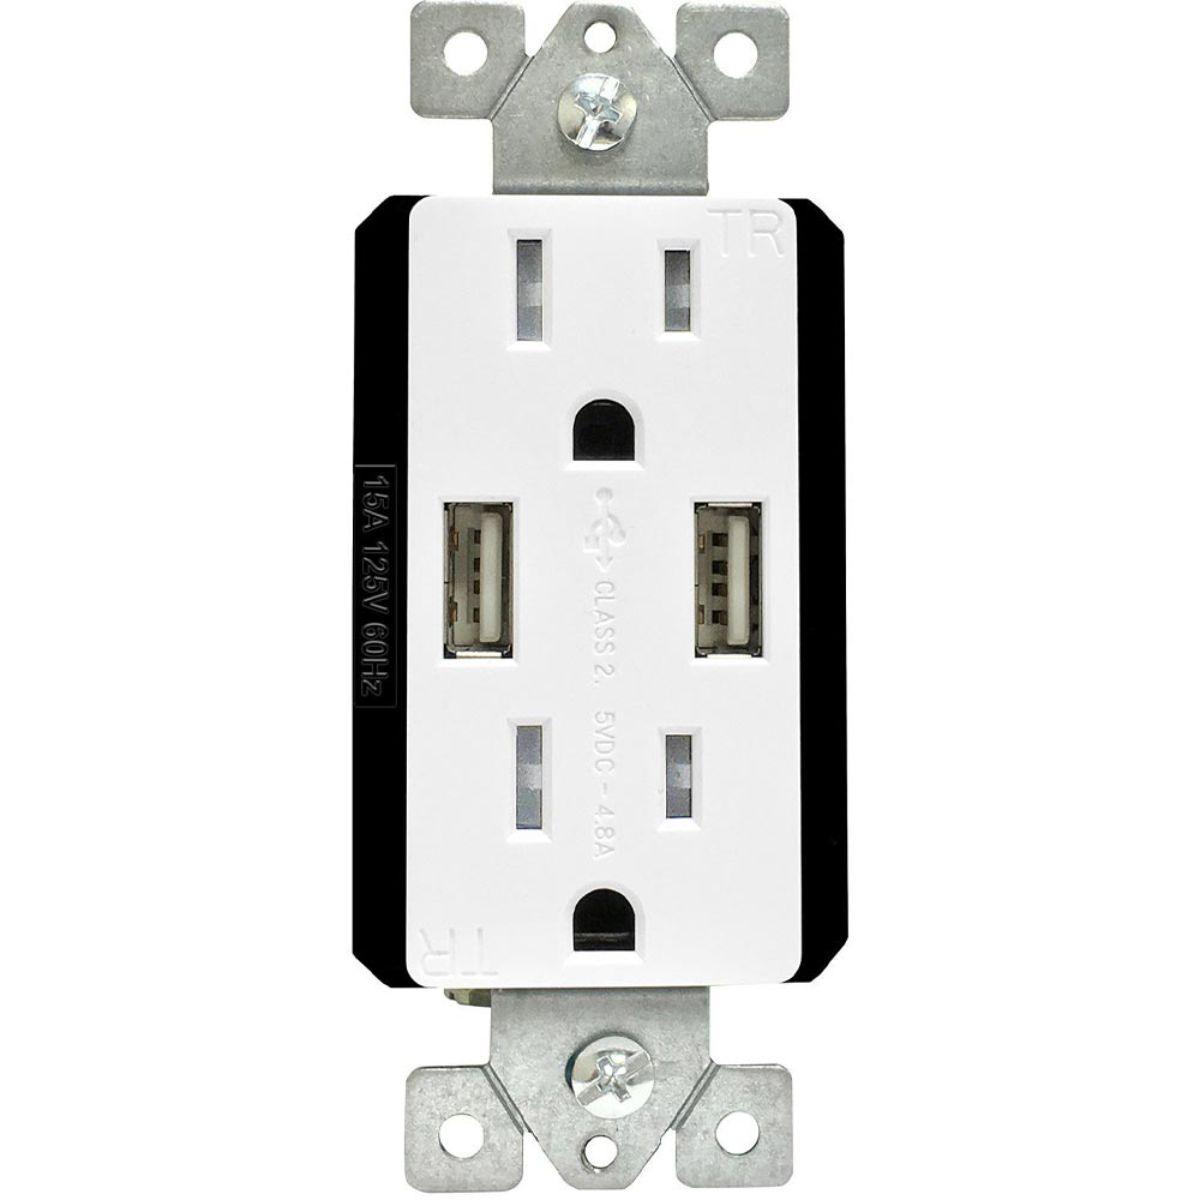 4.8A Ultra Hi-Speed USB 15A 120-Volt Tamper Resistant Receptacle w/Interchangeable Cover